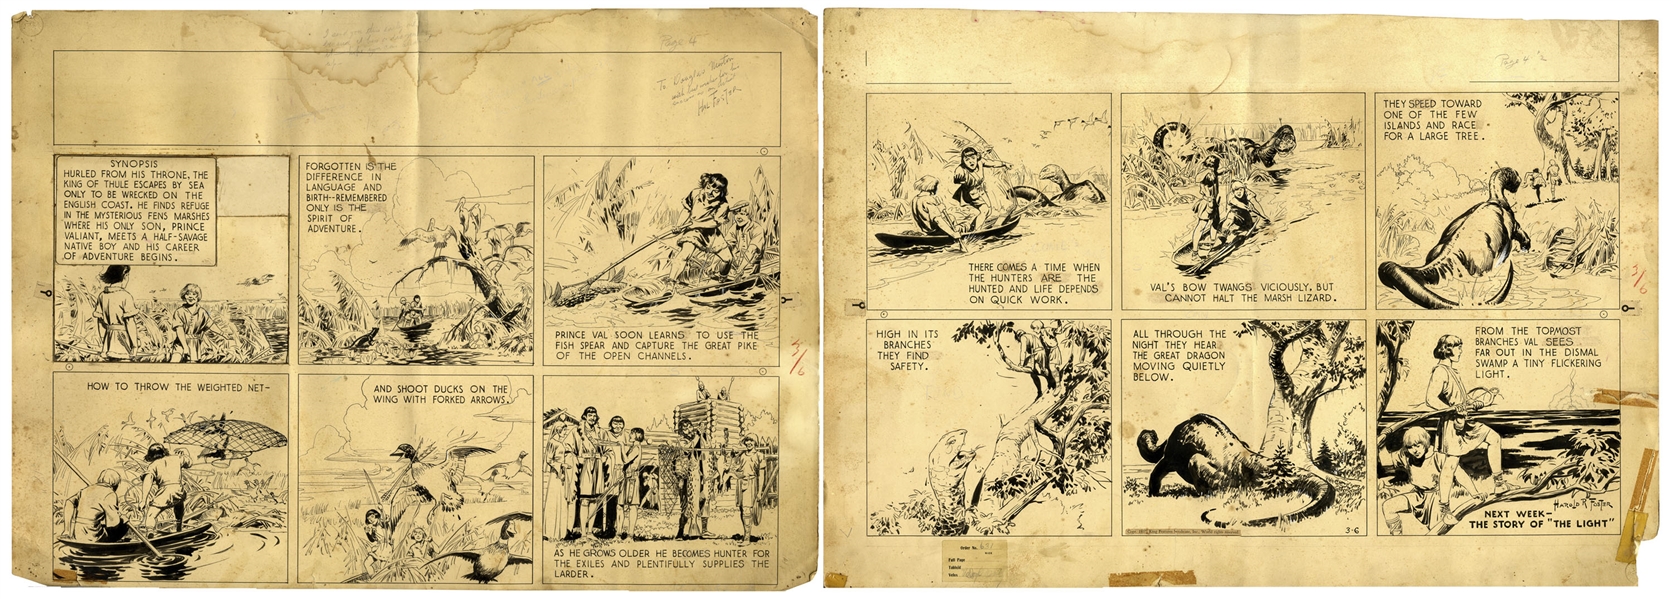 Prince Valiant Strip by Hal Foster Dated 6 March 1937 -- 4th Prince Valiant Strip in the Series! -- Val's ''Career of Adventure Begins'' Here, Showing His Growth From Boy to Young Man